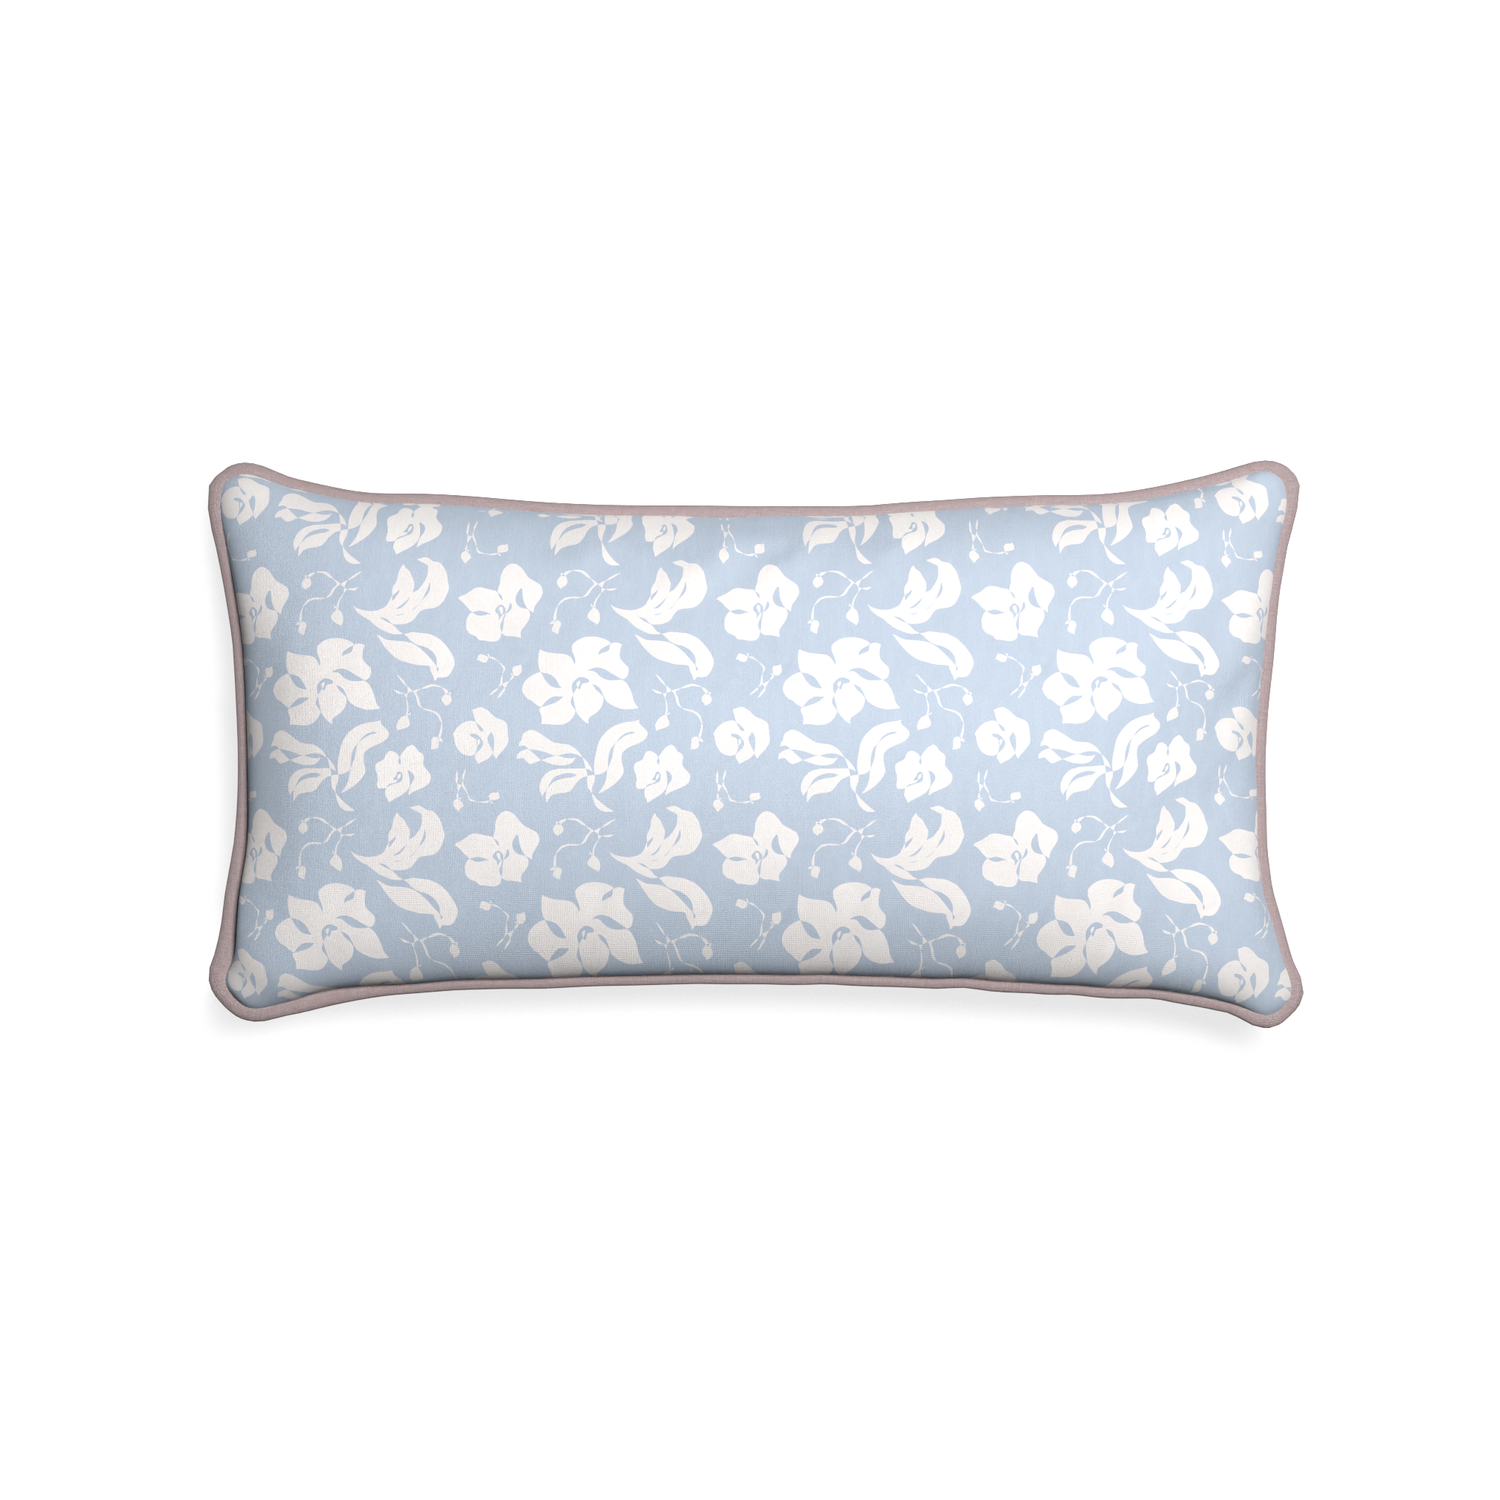 Midi-lumbar georgia custom cornflower blue floralpillow with orchid piping on white background